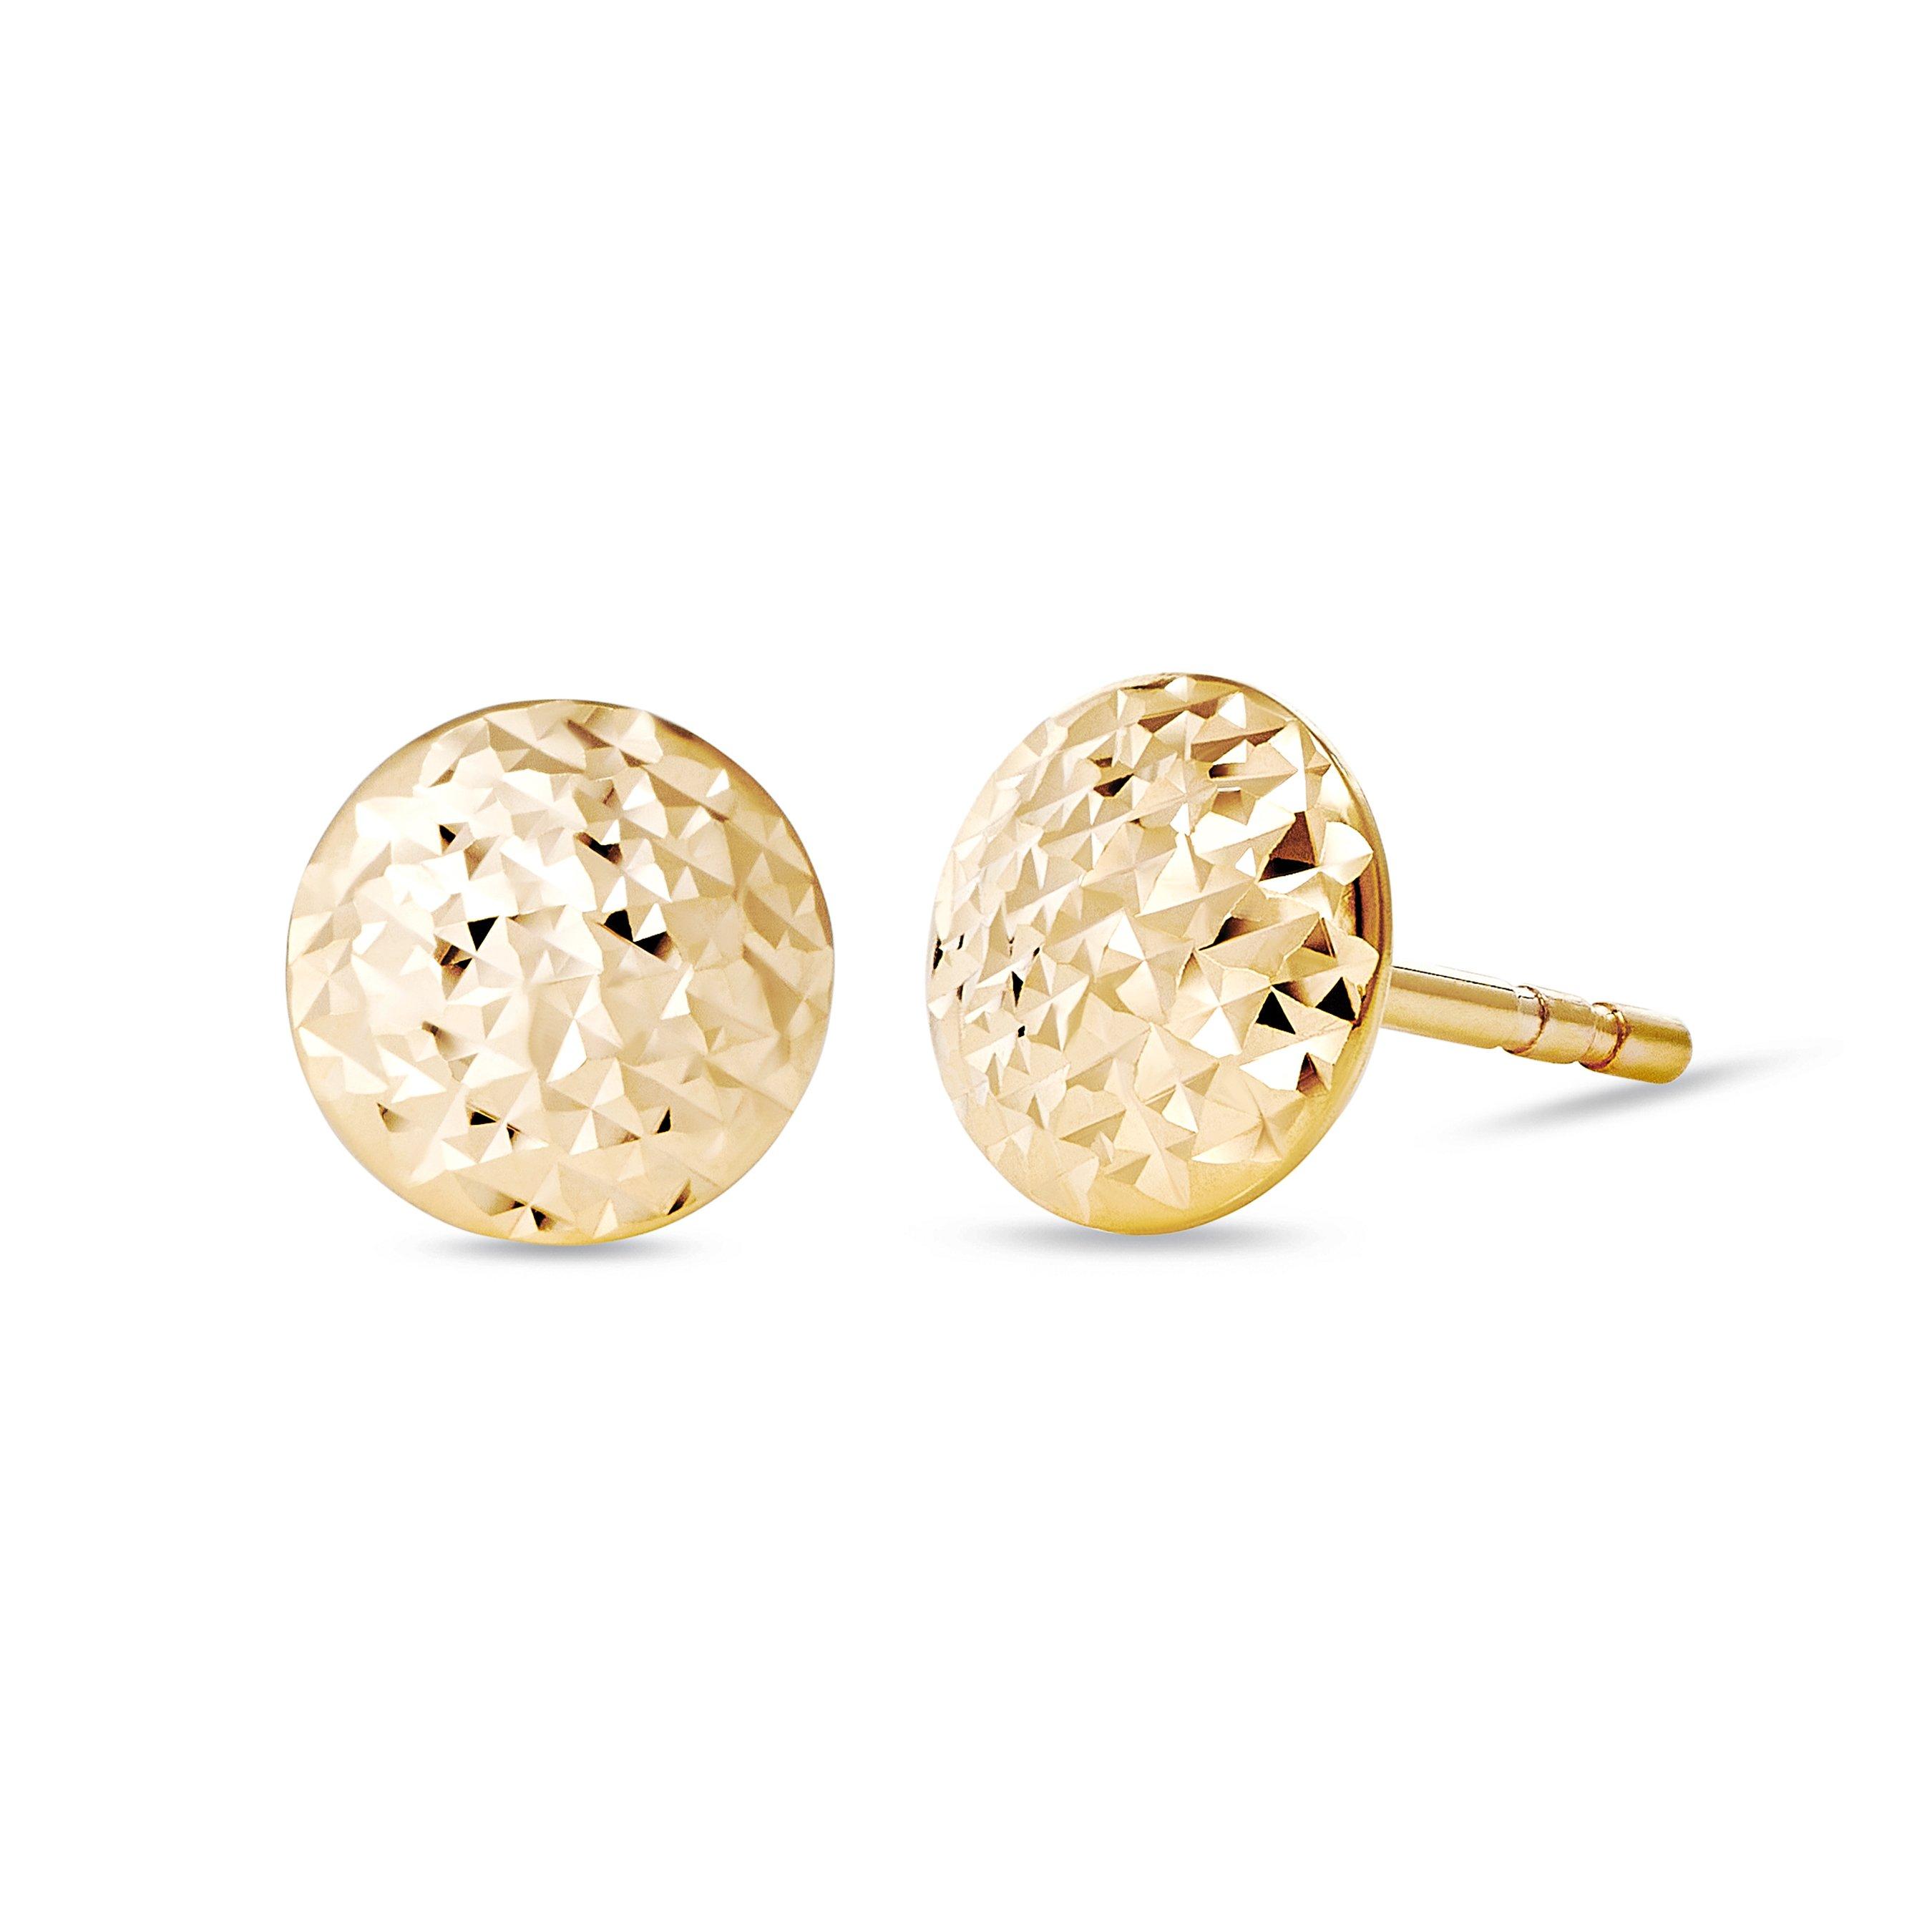 9ct Yellow Gold Circle Stud Earrings | 0011904 | Beaverbrooks the Jewellers